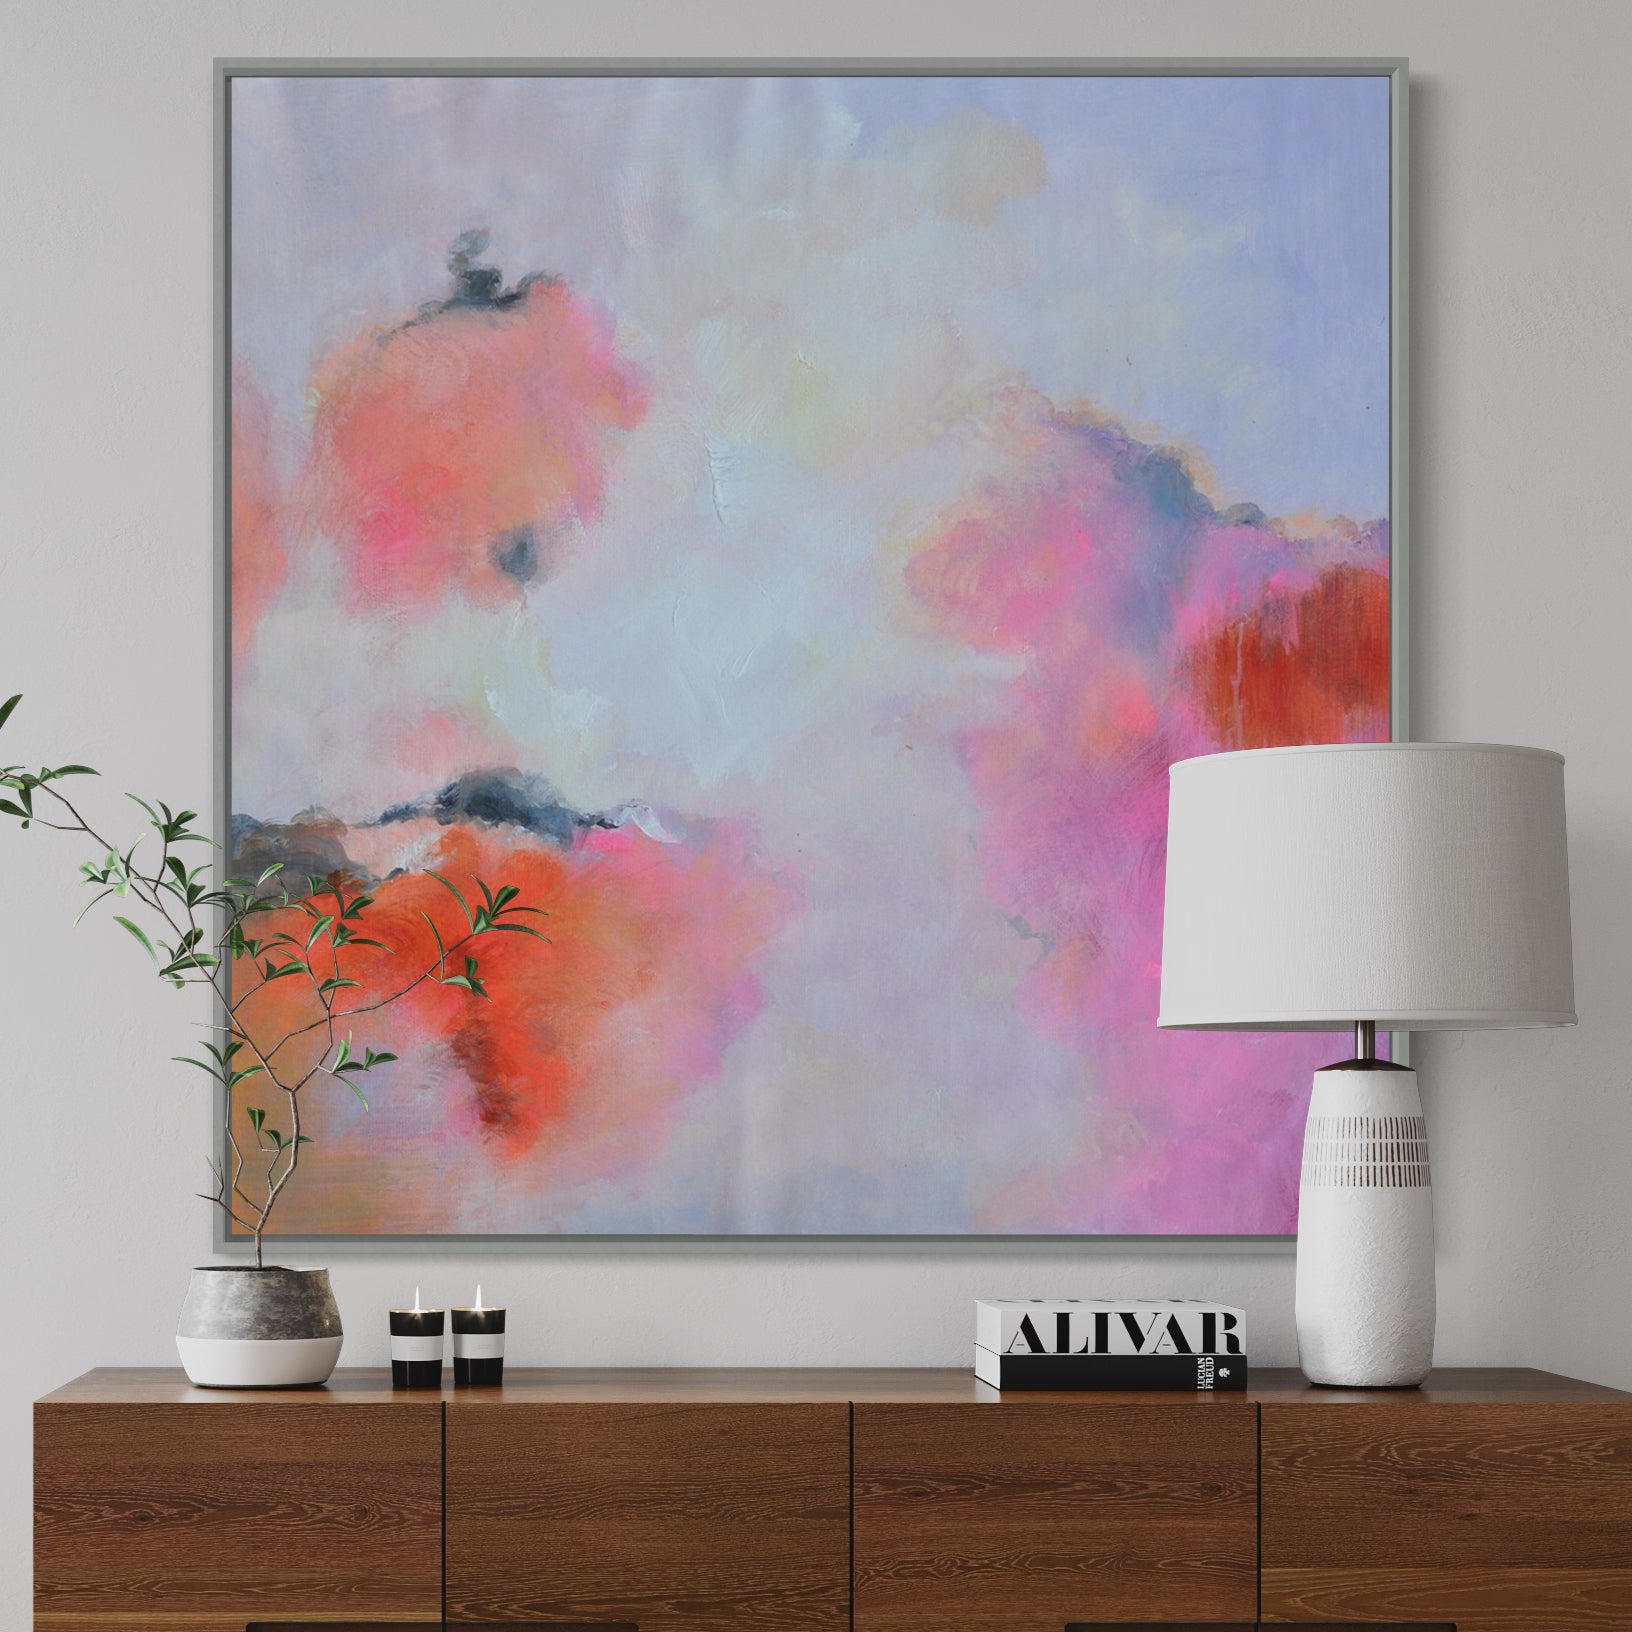 Cotton Candy, Black And Golden / 120x120cm